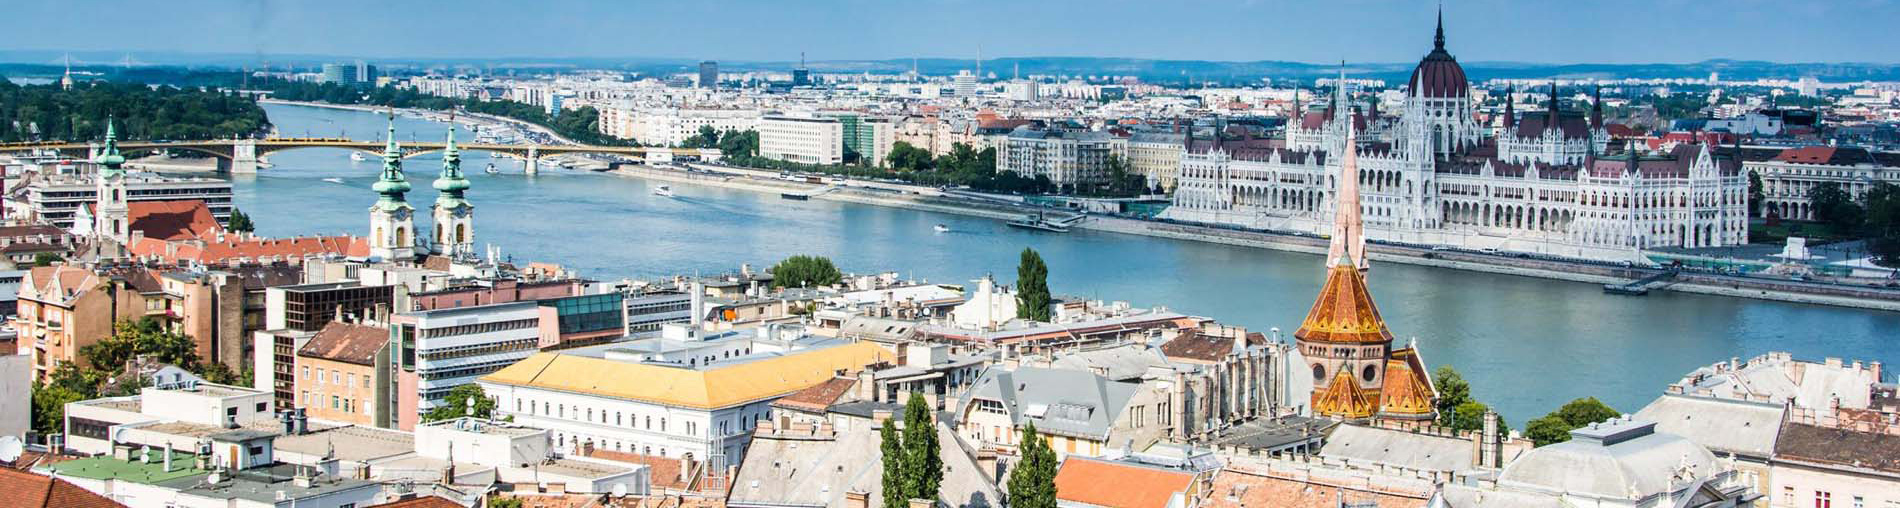 Hungary Holiday Tour Packages From India